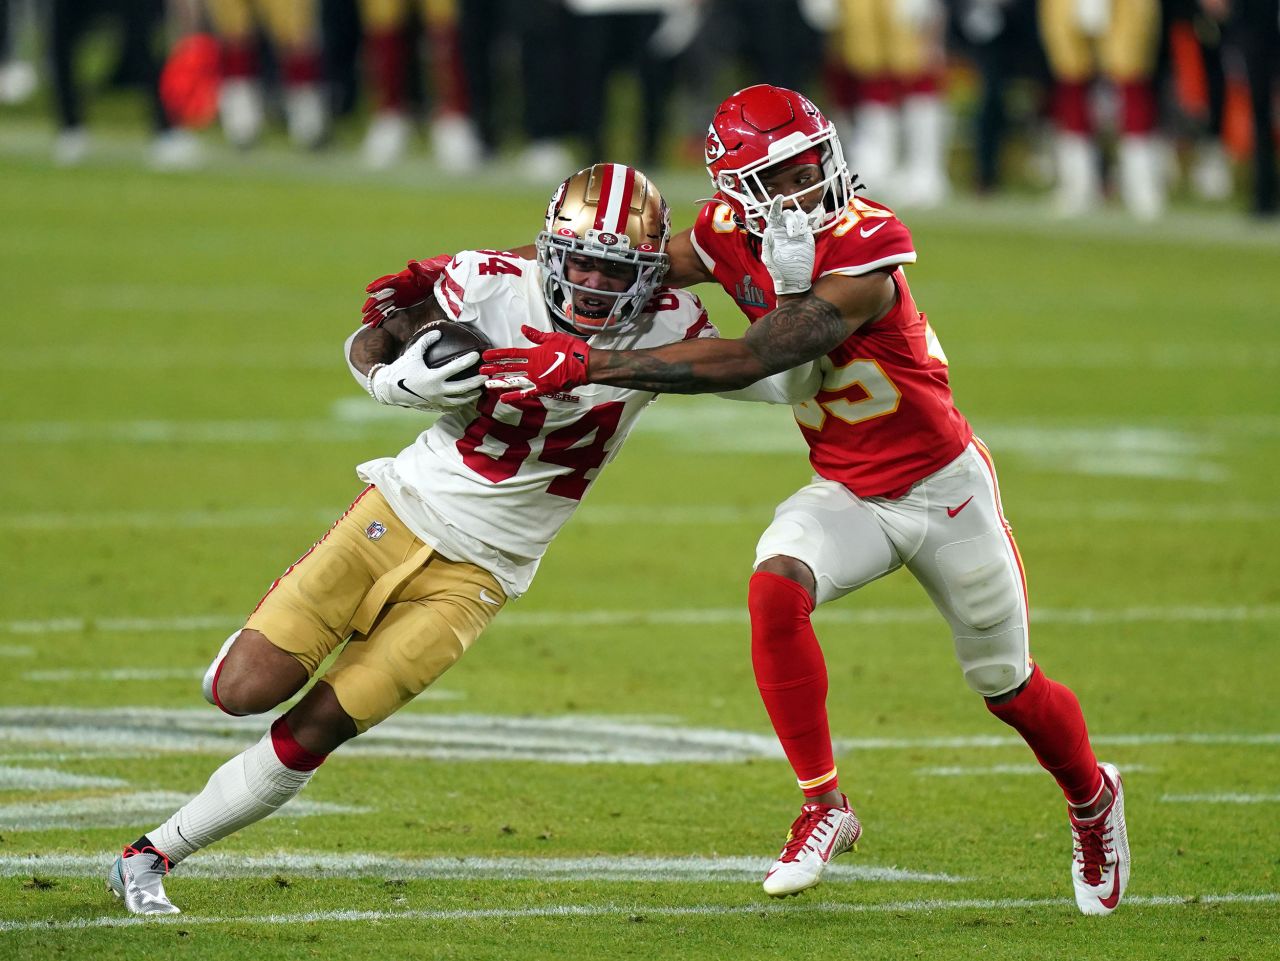 49ers wide receiver Kendrick Bourne is tackled by Chiefs cornerback Charvarius Ward in the third quarter.